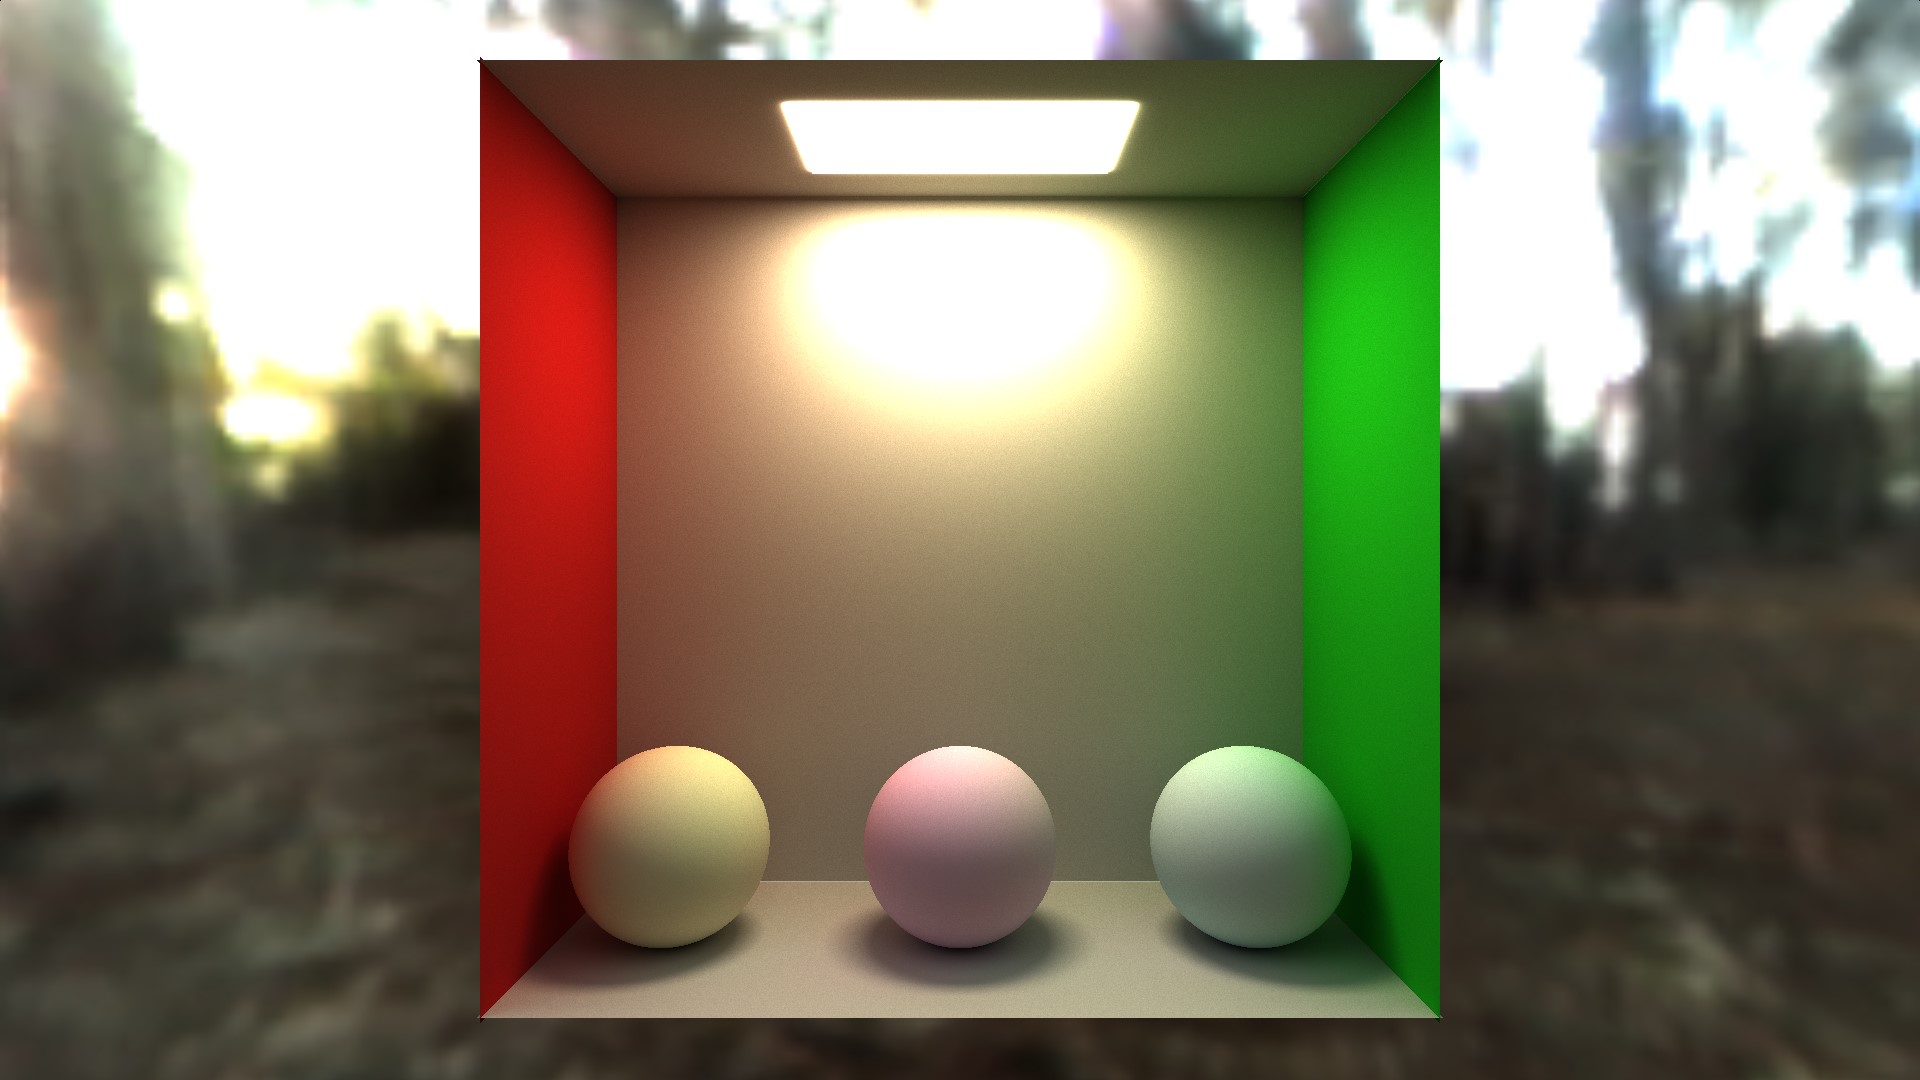 Getting Started with Ray Tracing